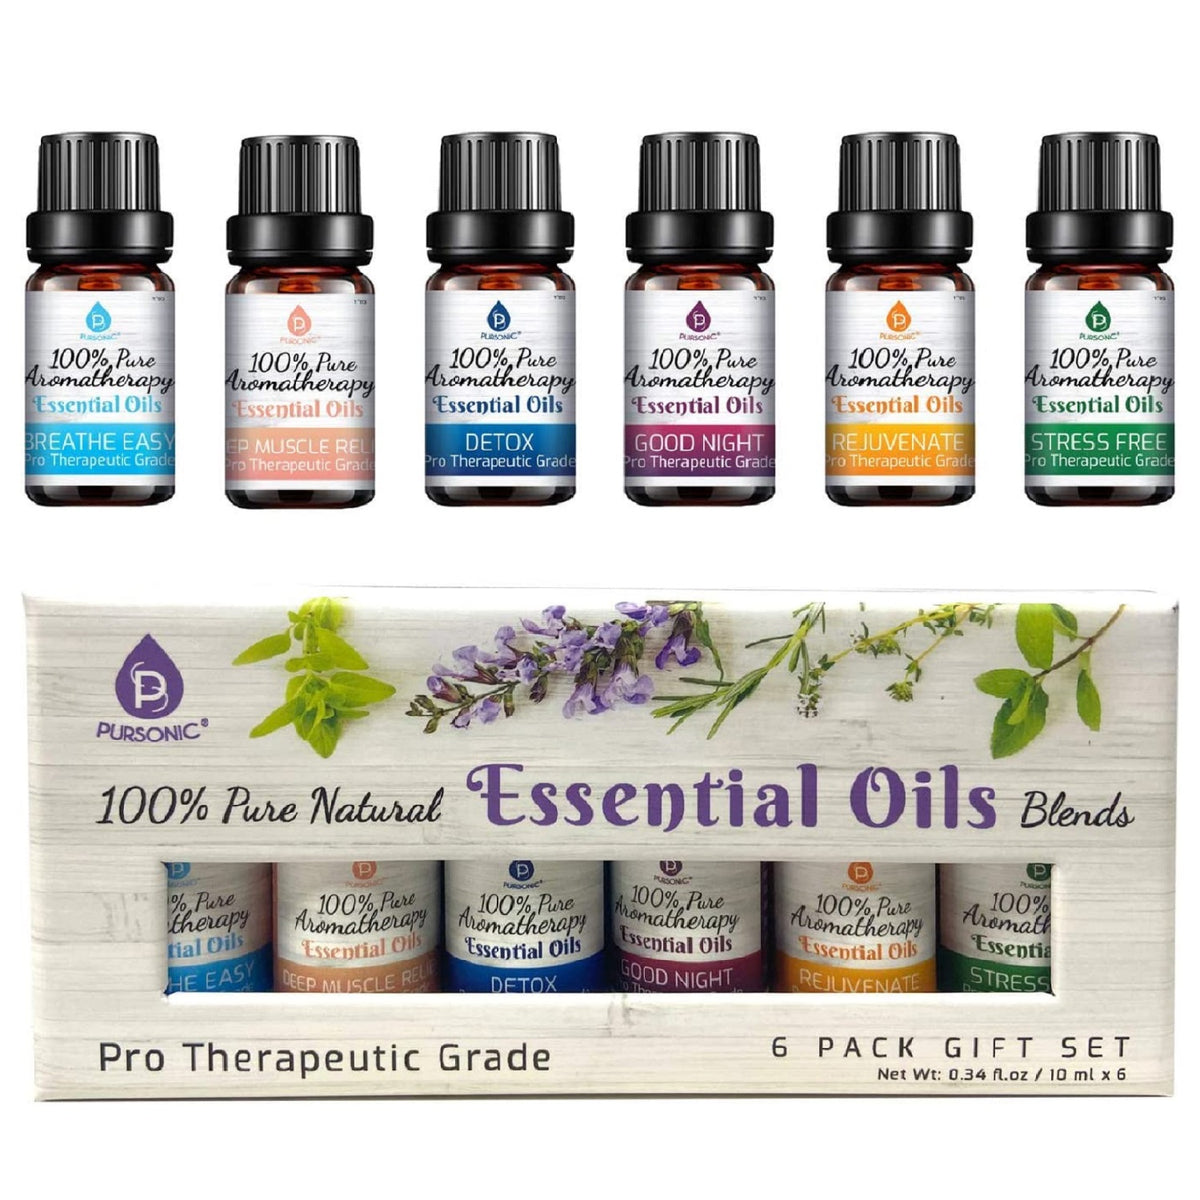 Pursonic 100% Pure Essential Aromatherapy Oils Gift Set (8-Pack)